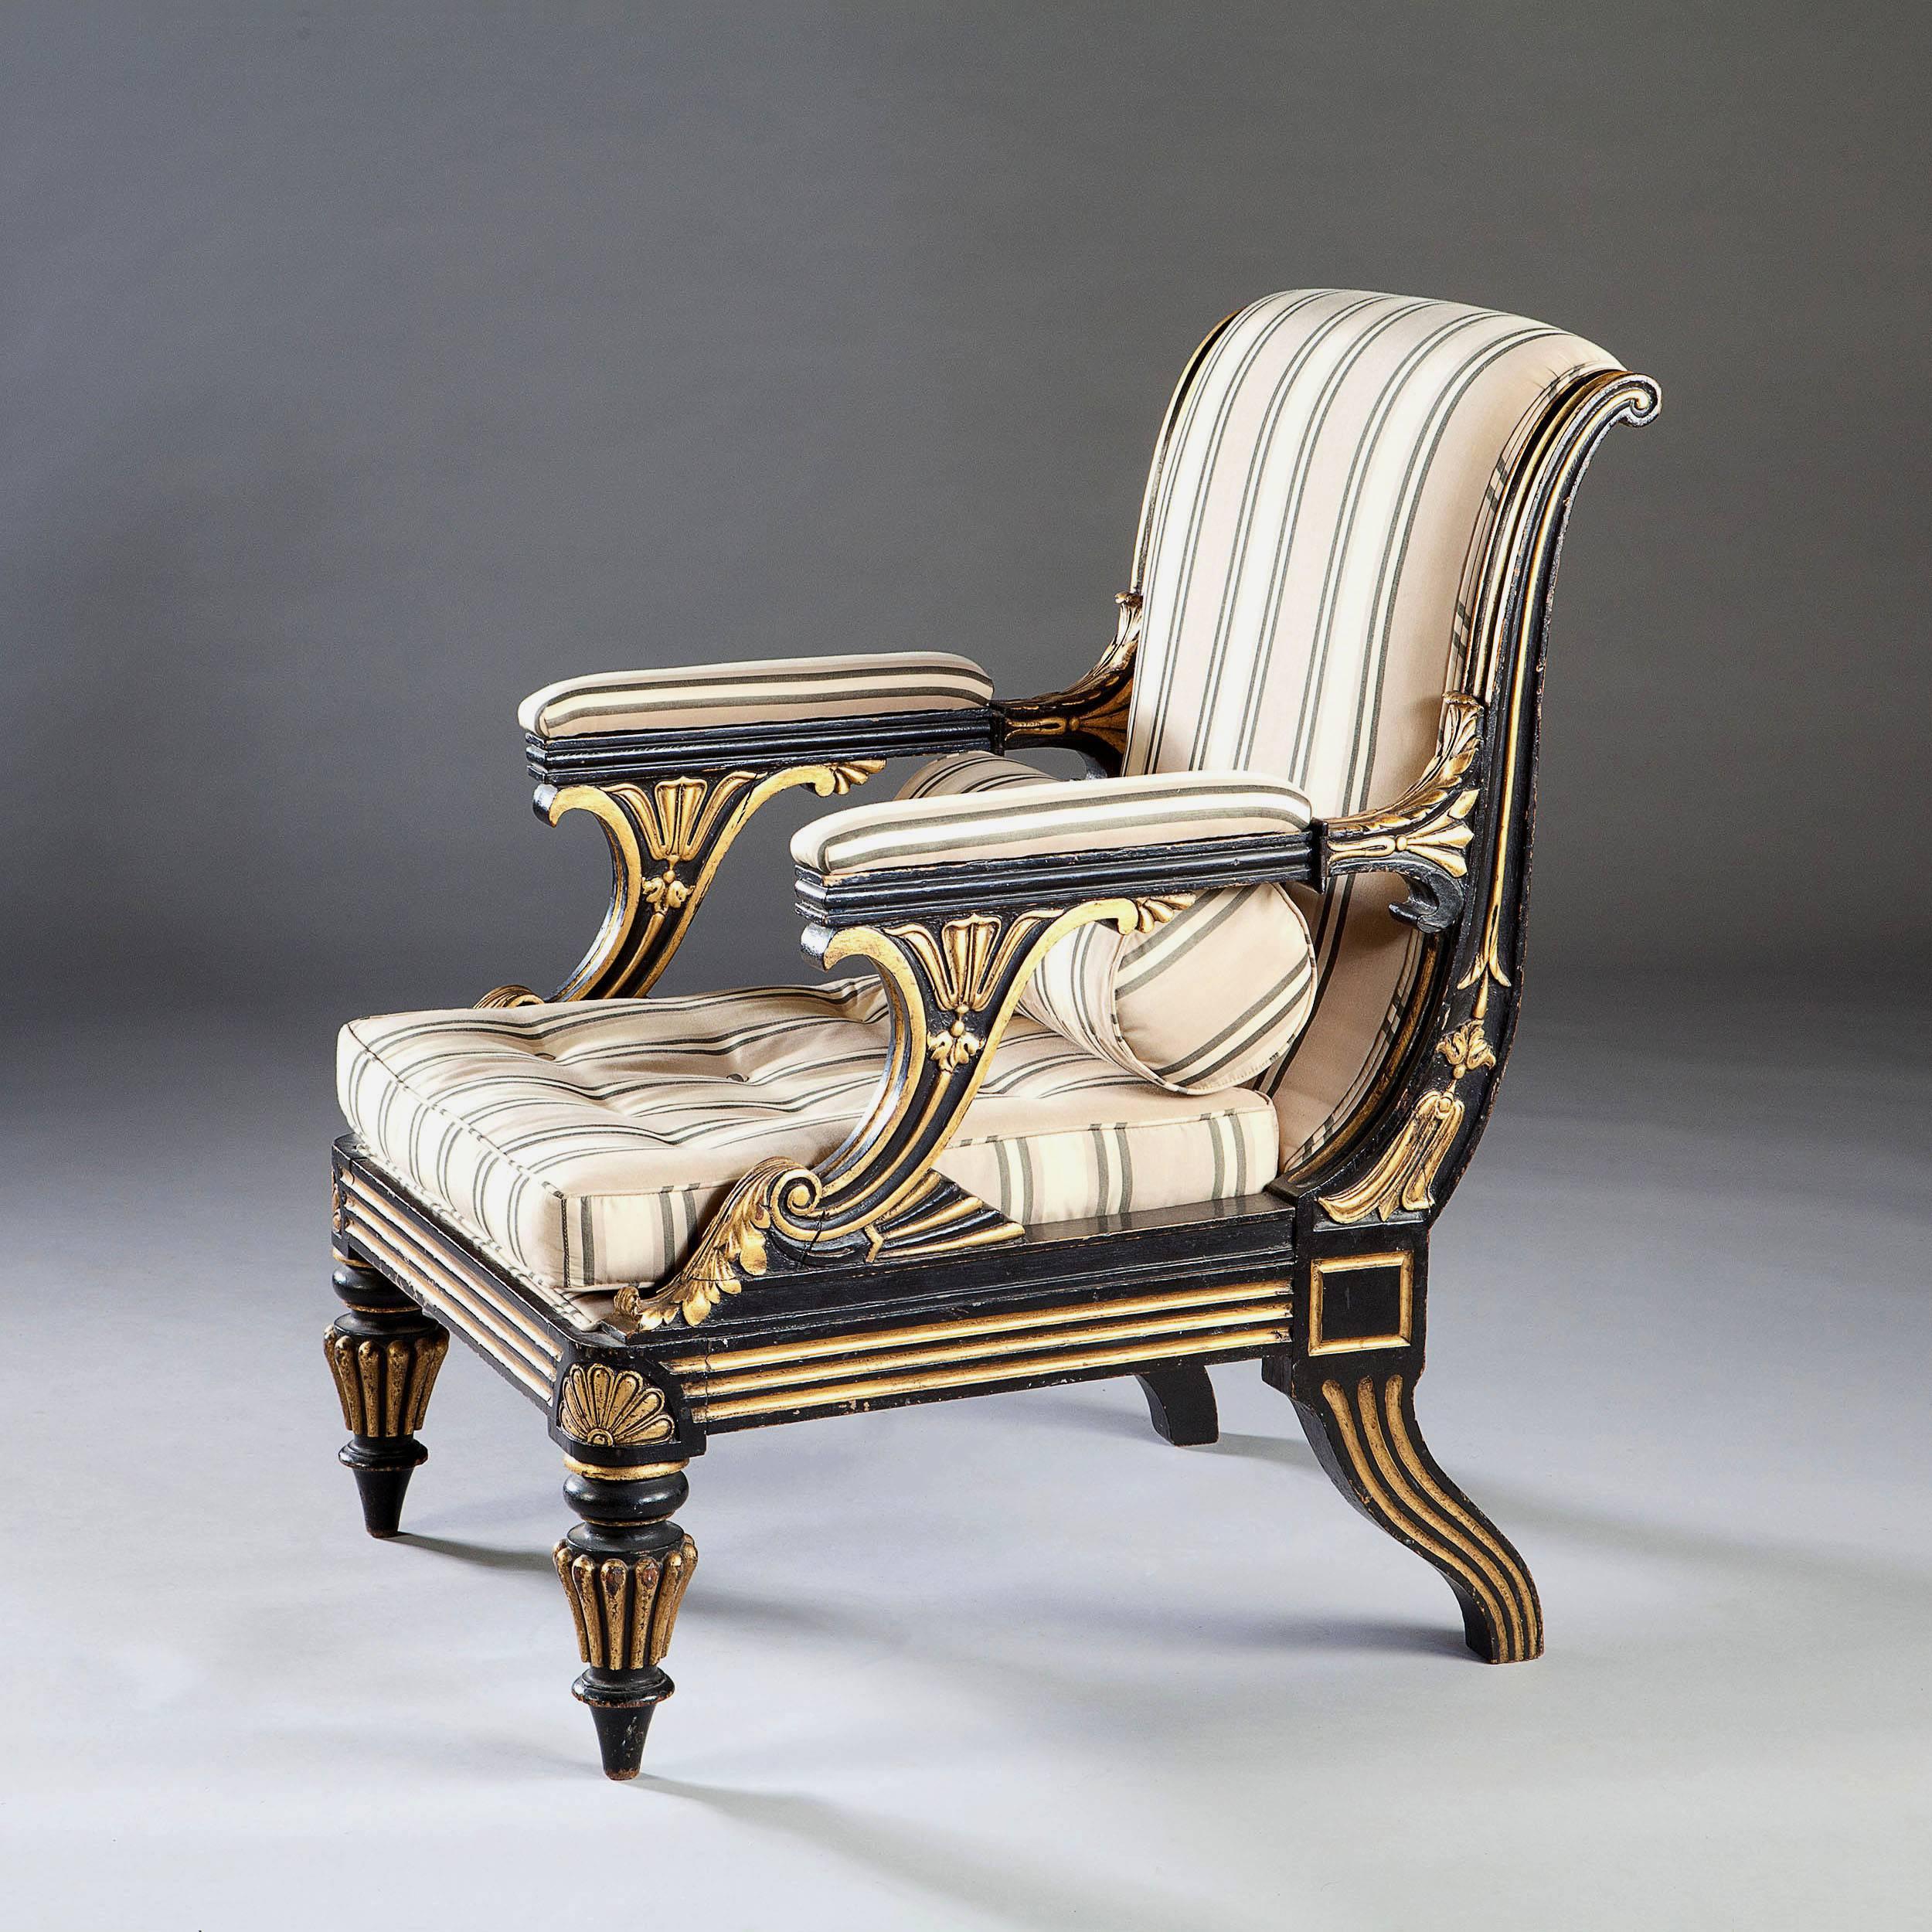 A fine early 19th century ebonized and gilded library armchair, without swept arms, curved back and sabre legs.

Attributed to Morel and Hughes.